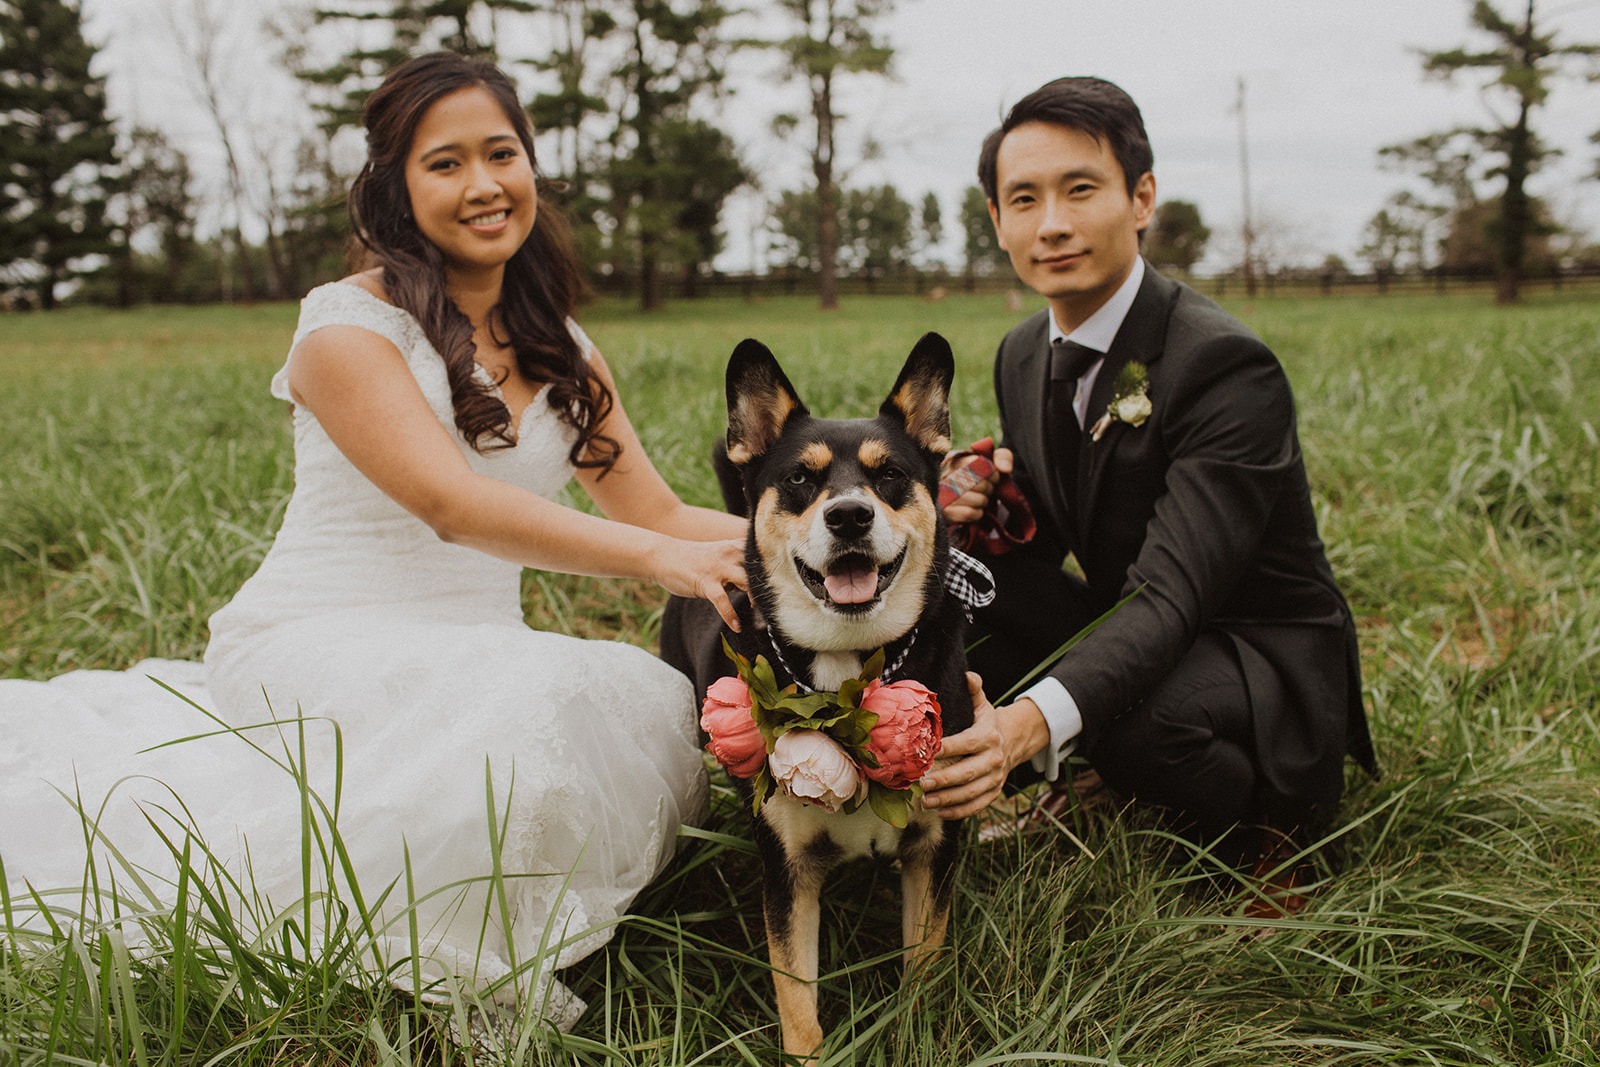 Couple poses with dog at Virginia wedding venue